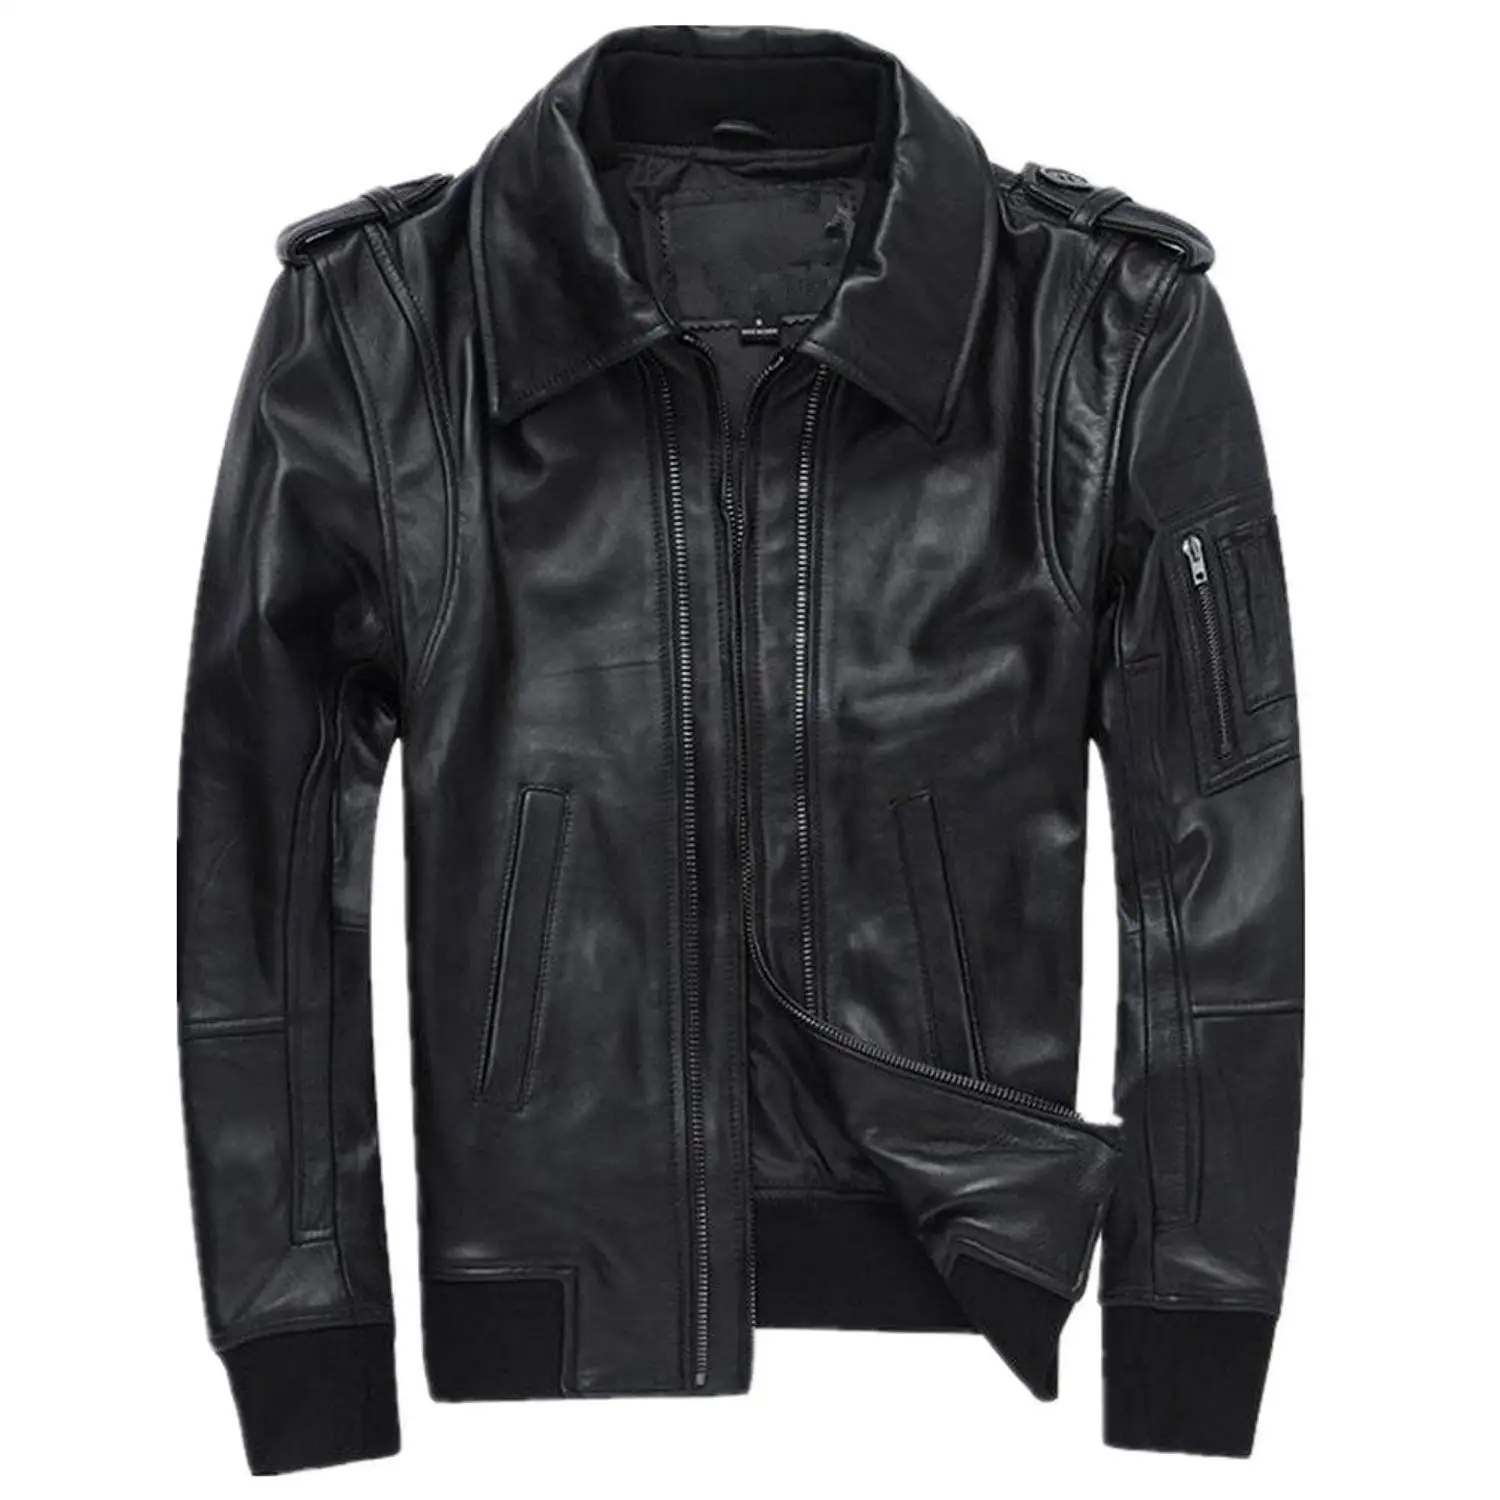 Cheap Leather Jacket Air Force, find Leather Jacket Air Force deals on